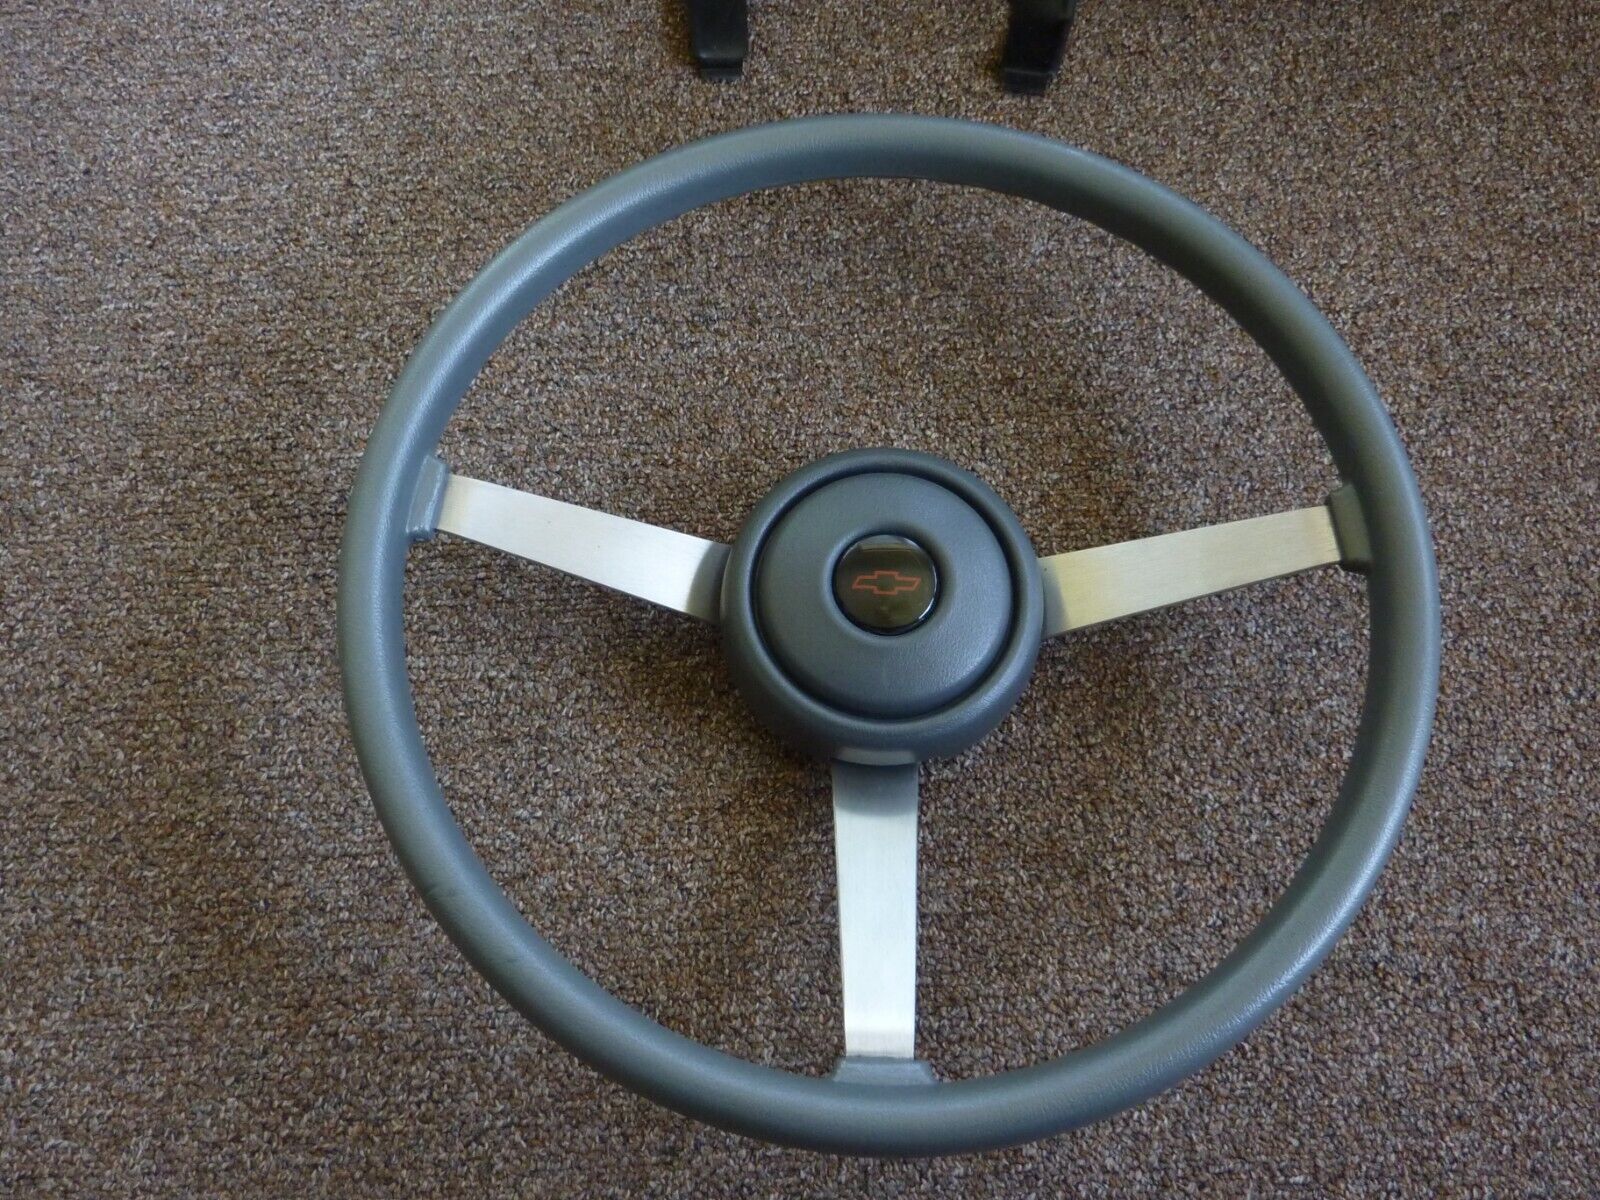 1990's CHEVY CAVALIER STEERING WHEEL WITH HORN BUTTON